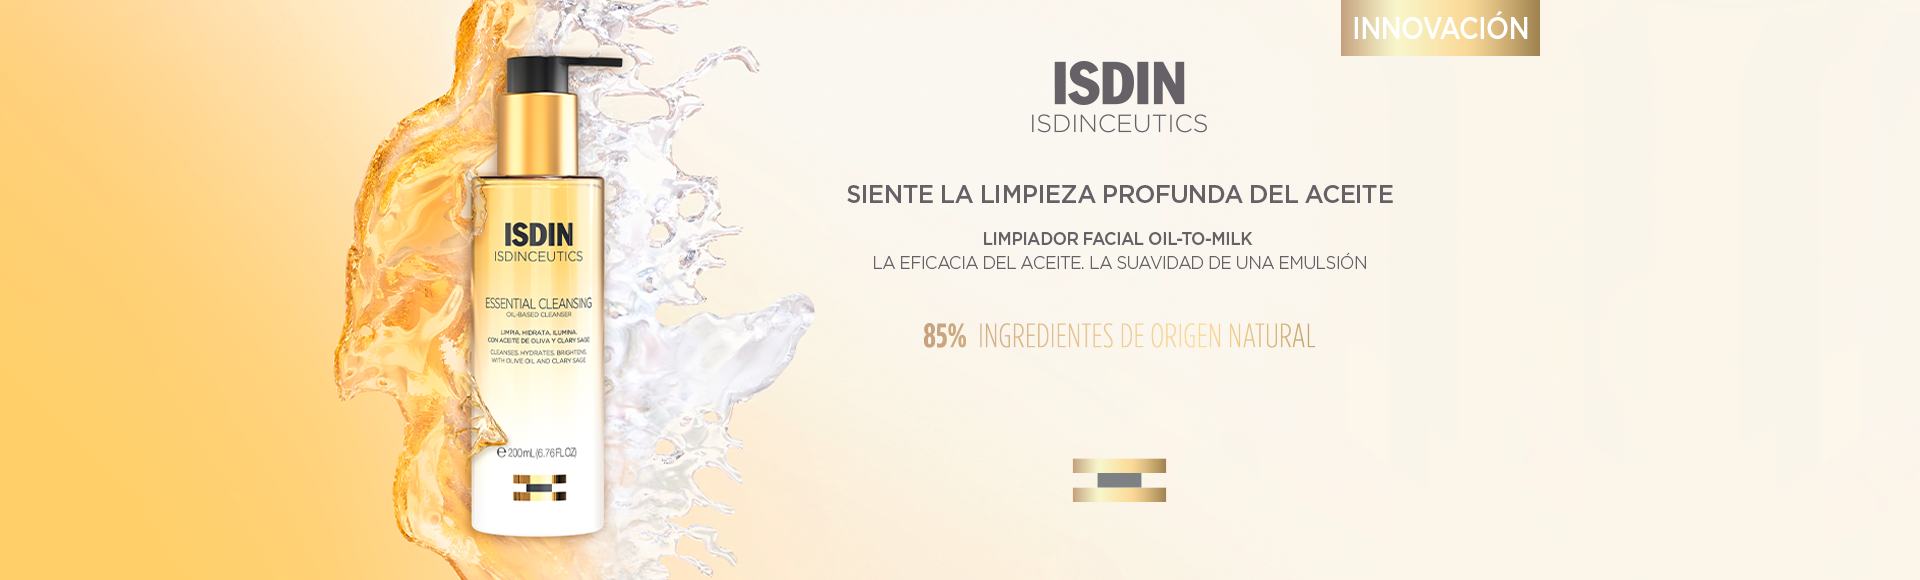 Isdin Essential Cleansing 200ml